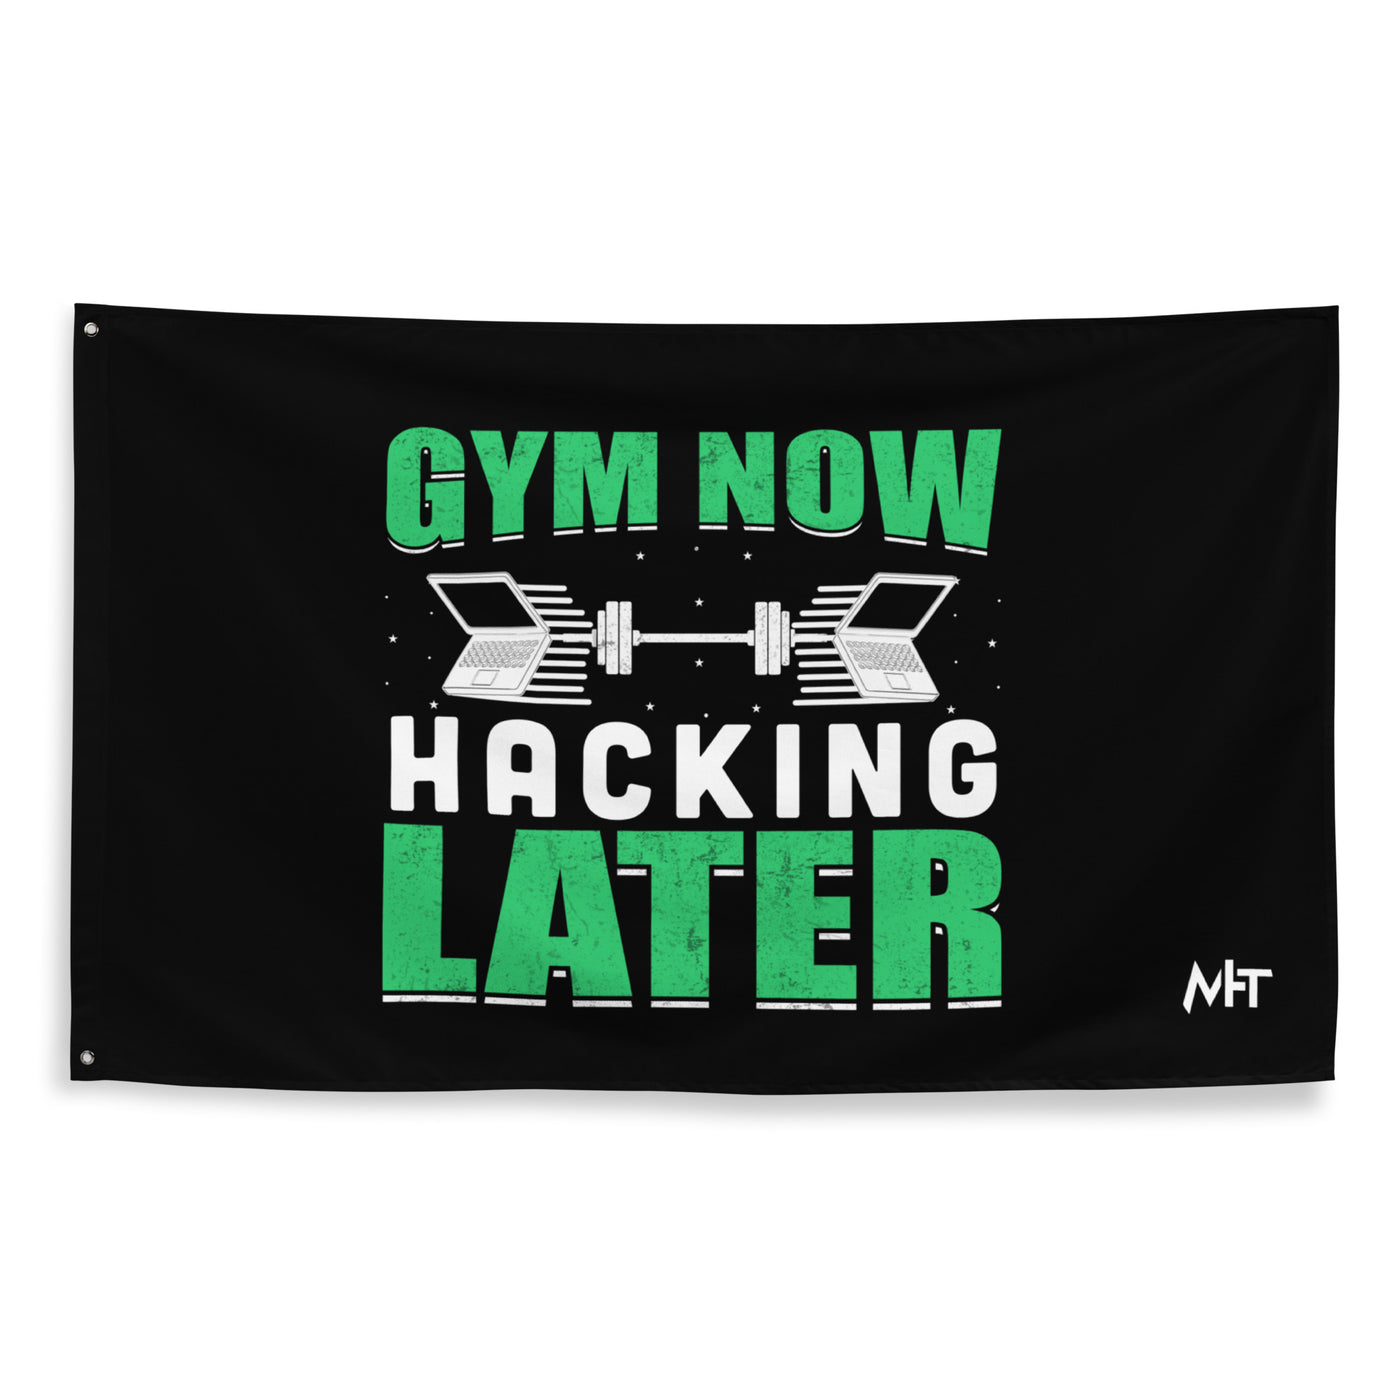 Gym now, hacking later - Flag